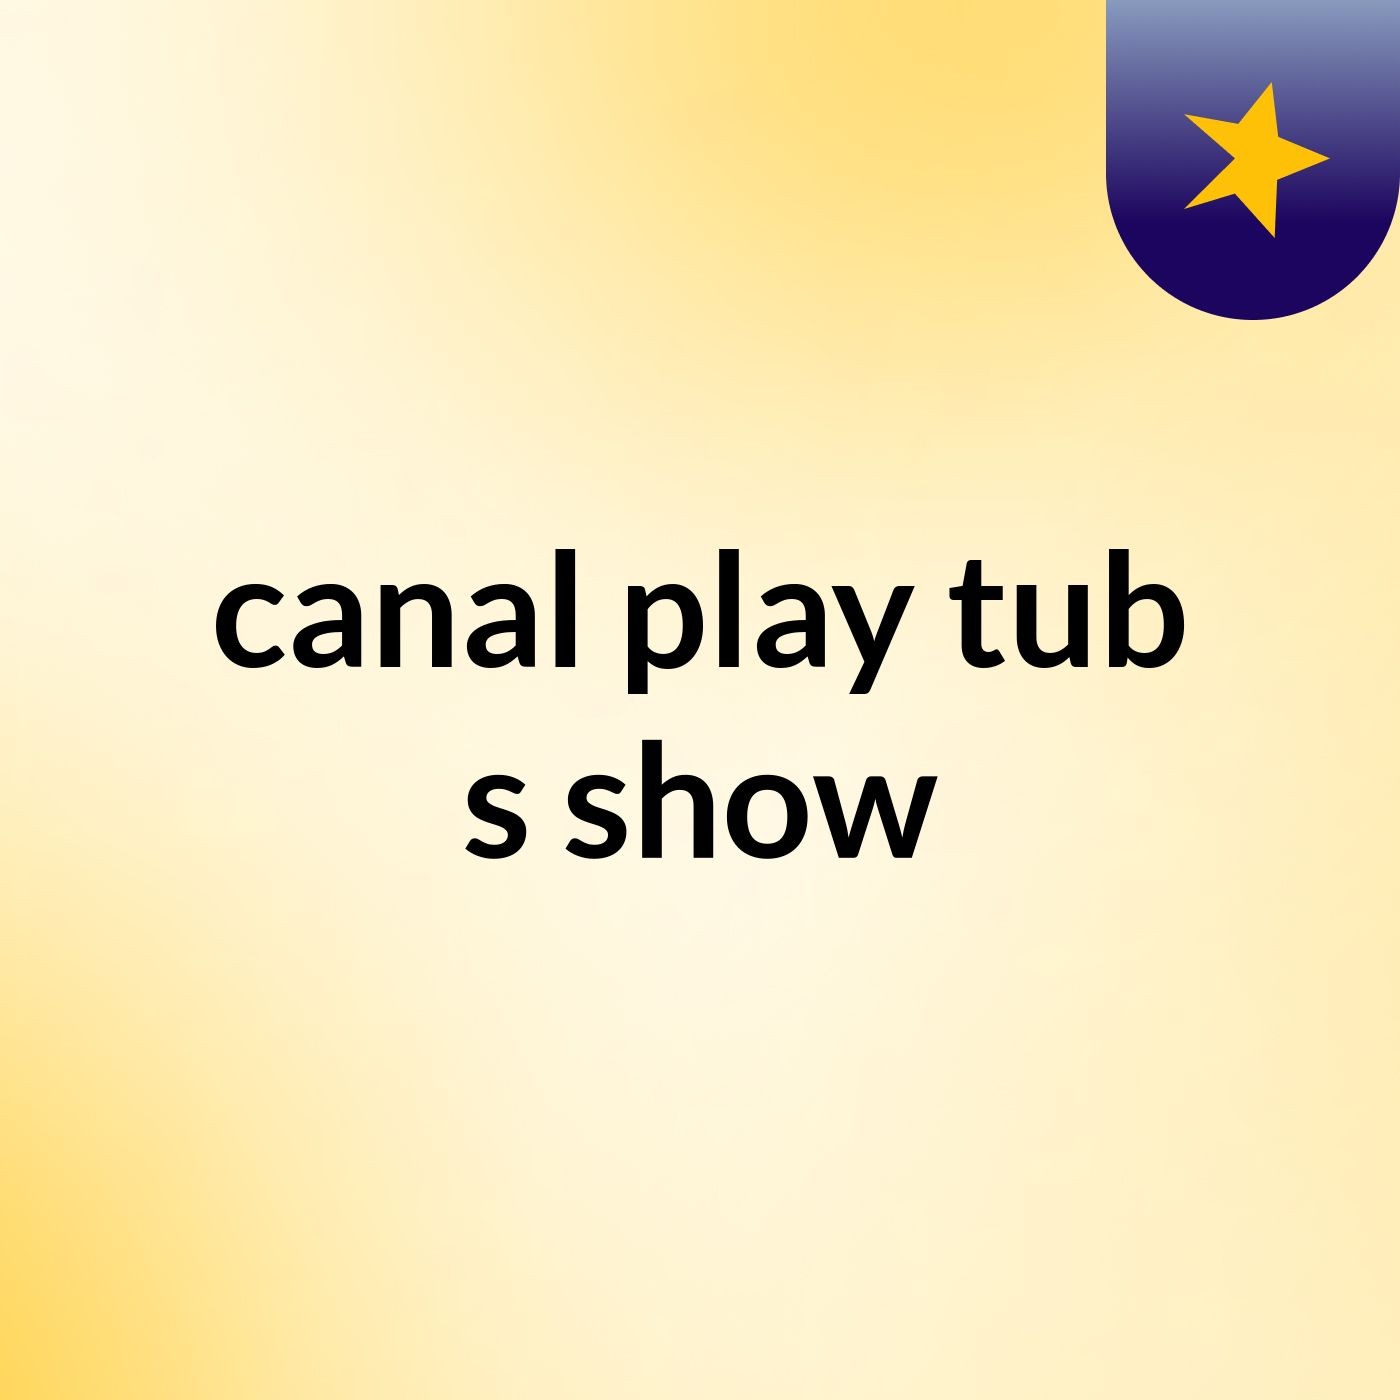 canal play tub's show